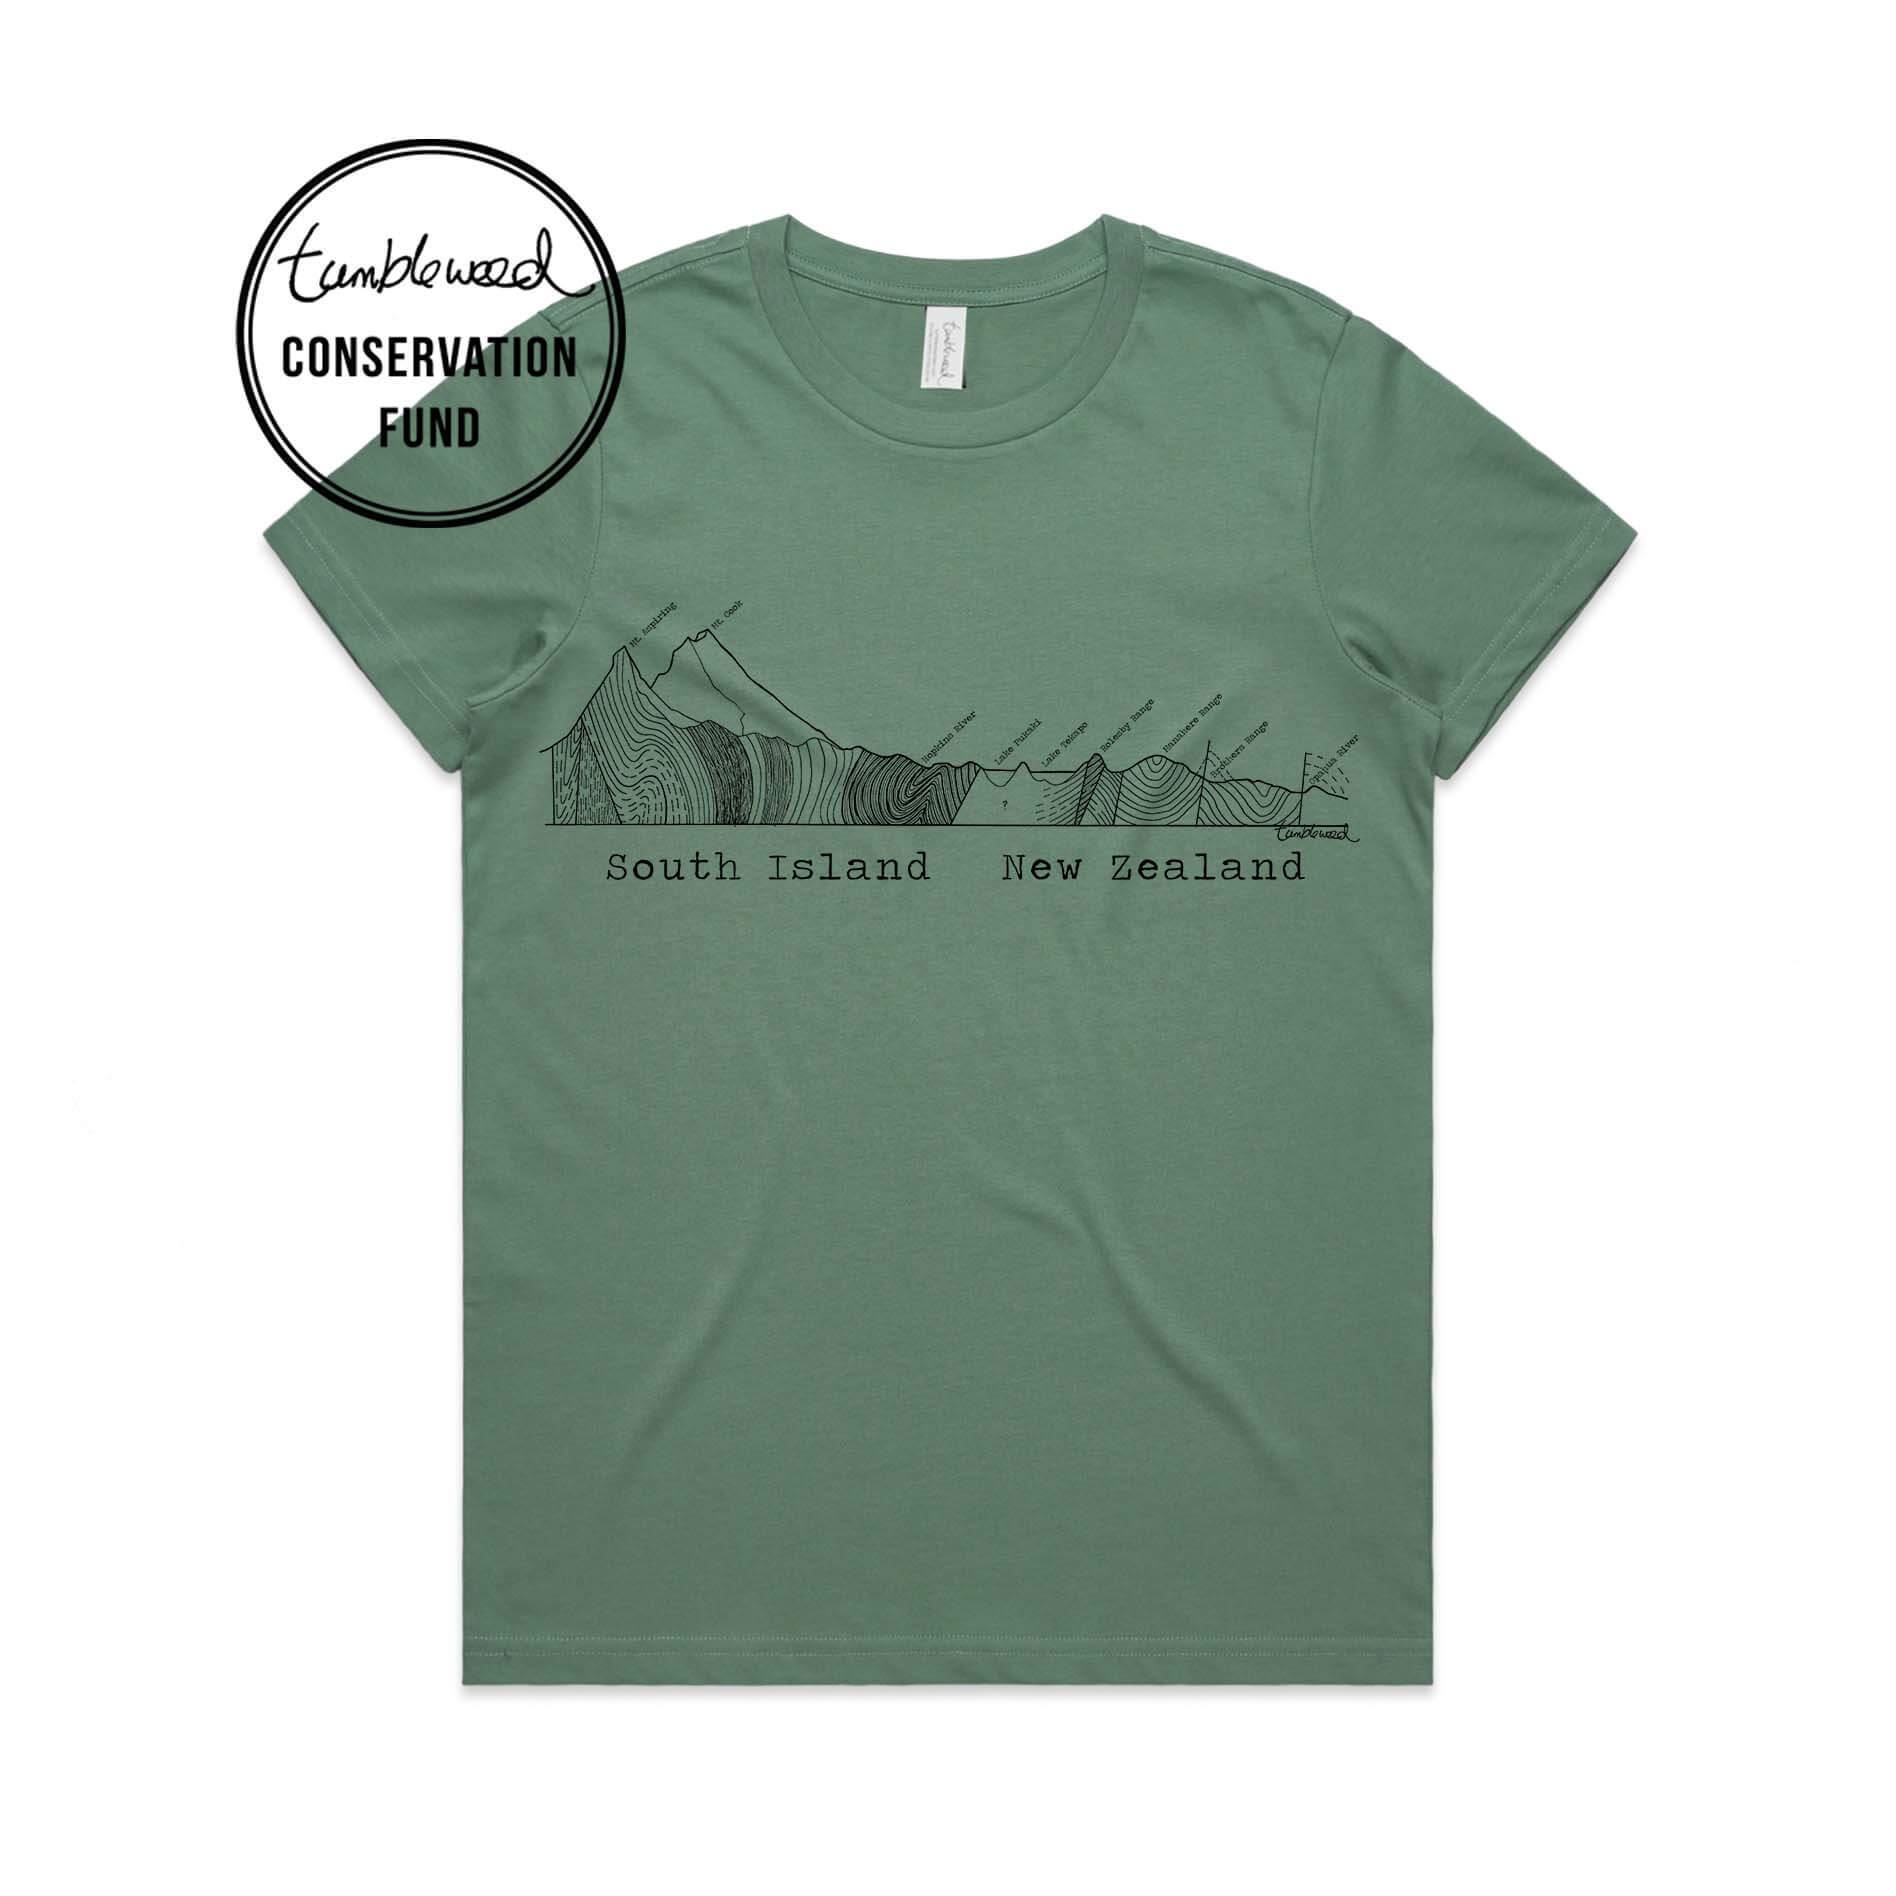 Sage, female t-shirt featuring a screen printed South Island Cross Section design.